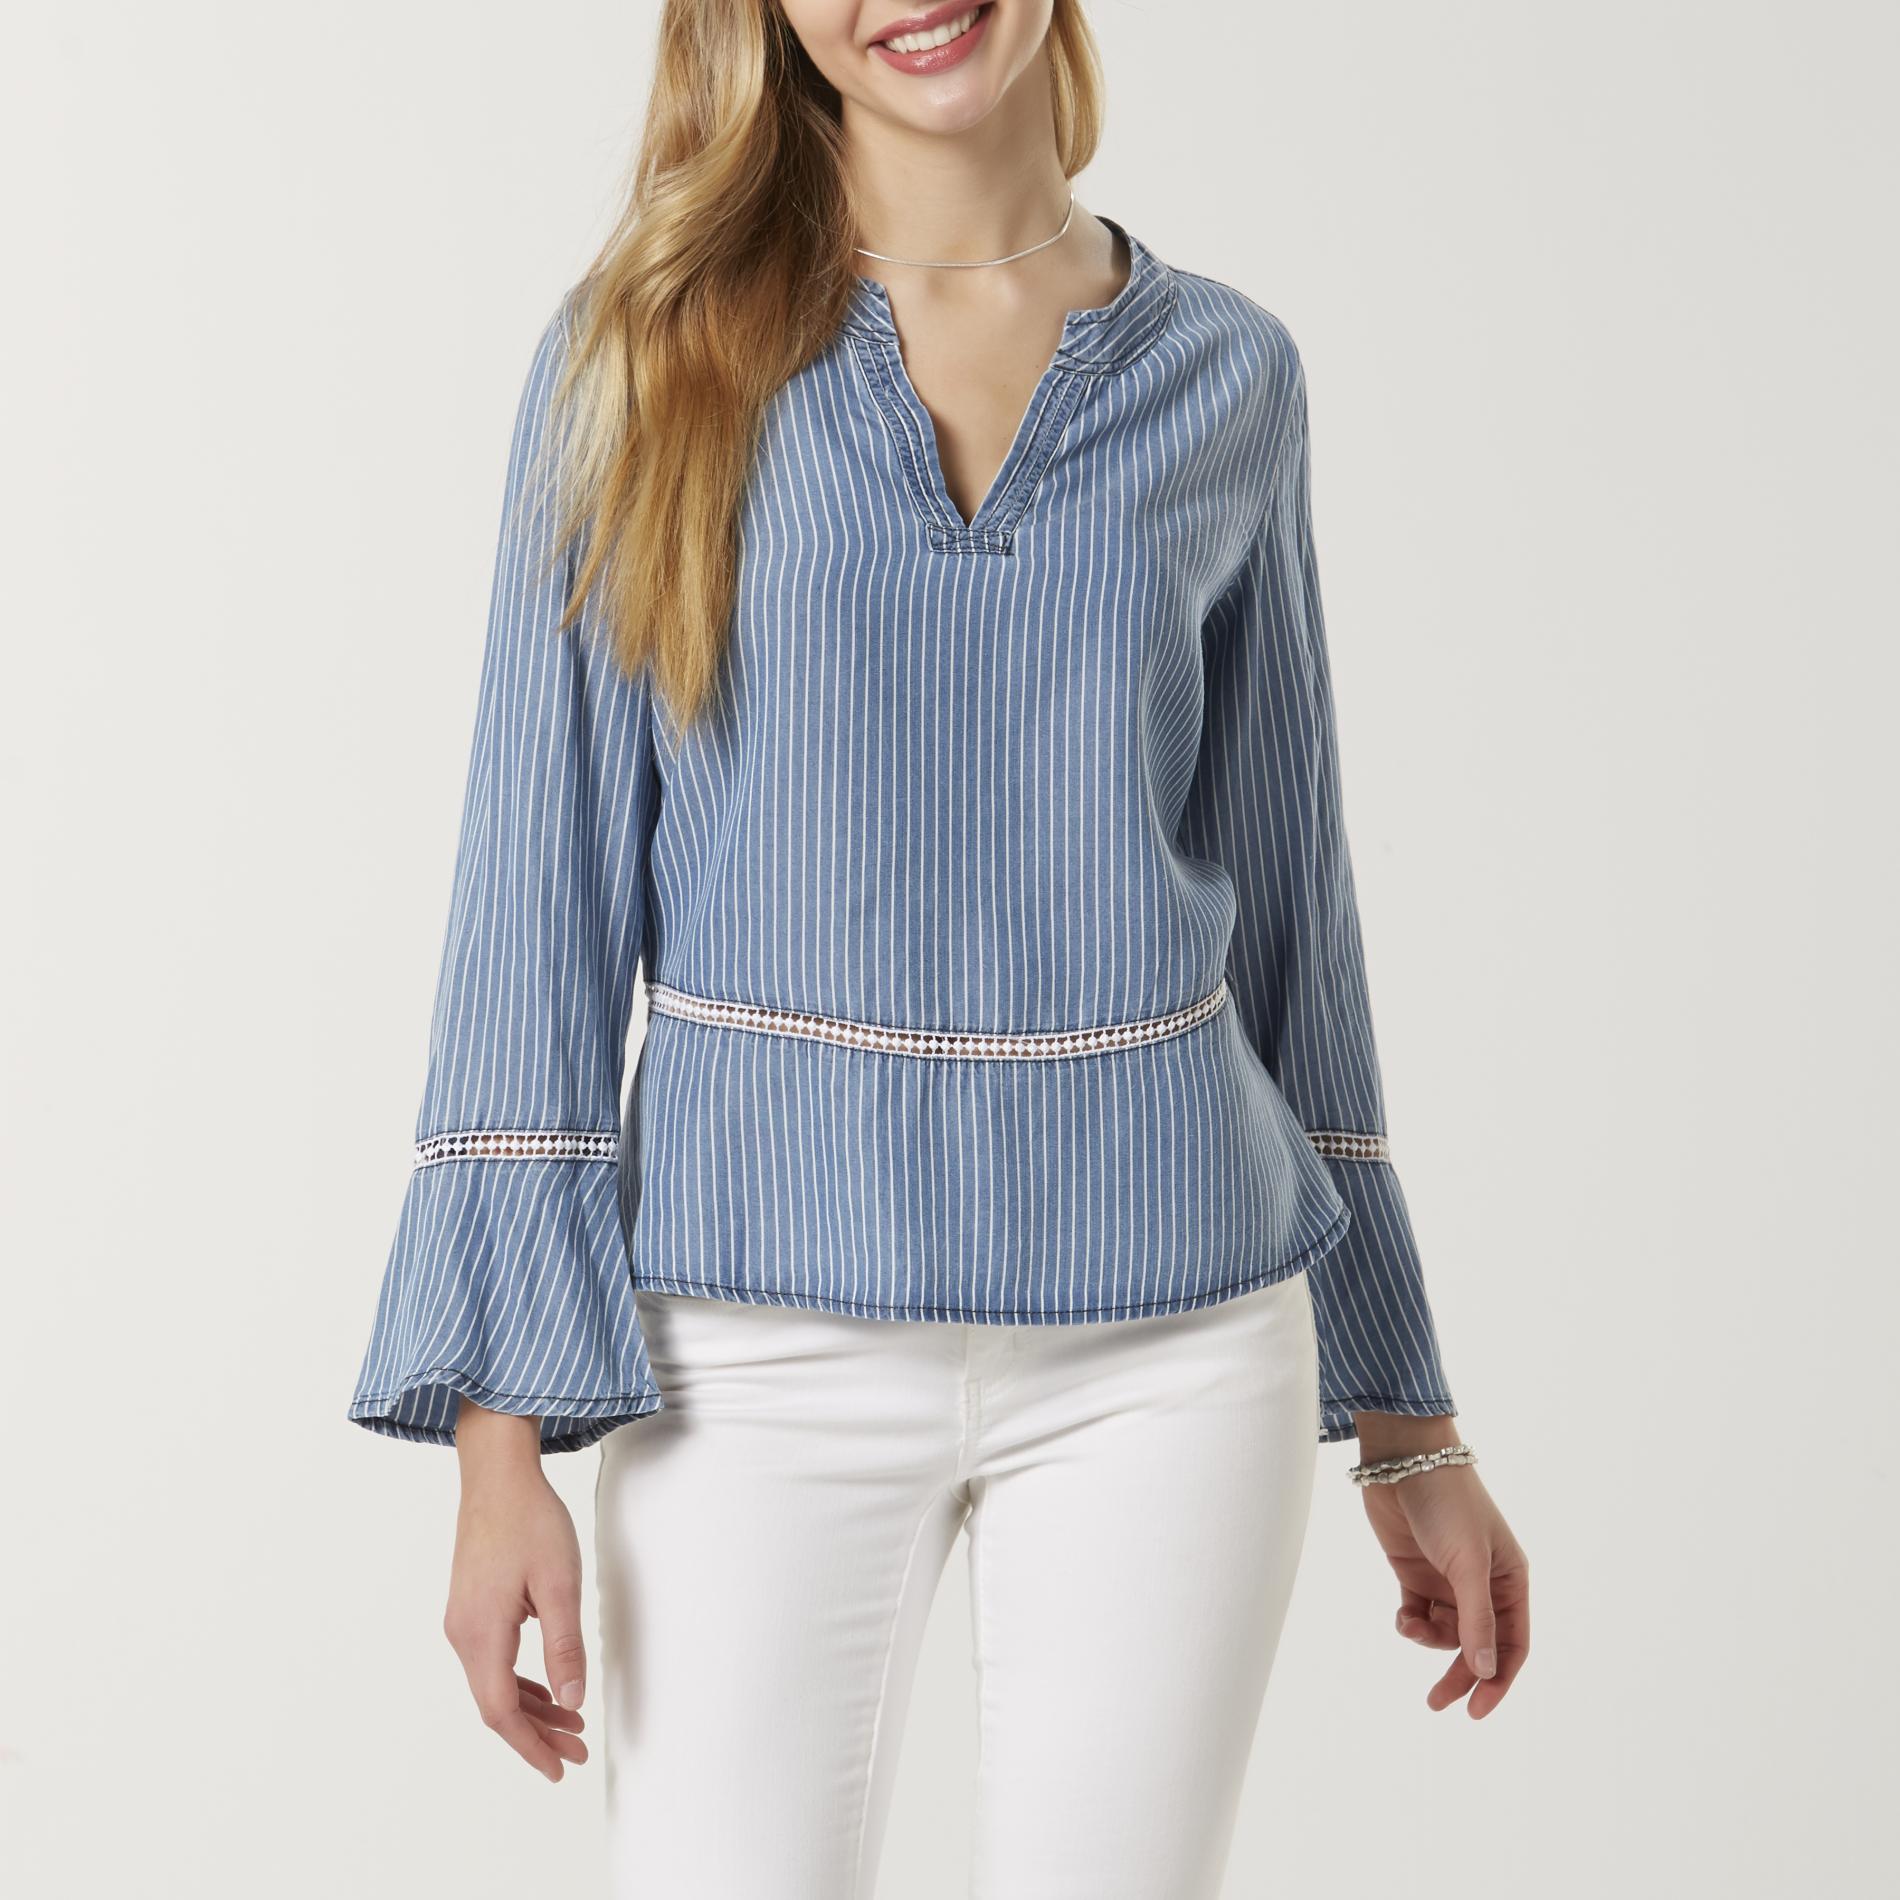 Simply Styled Women's Peasant Top - Striped